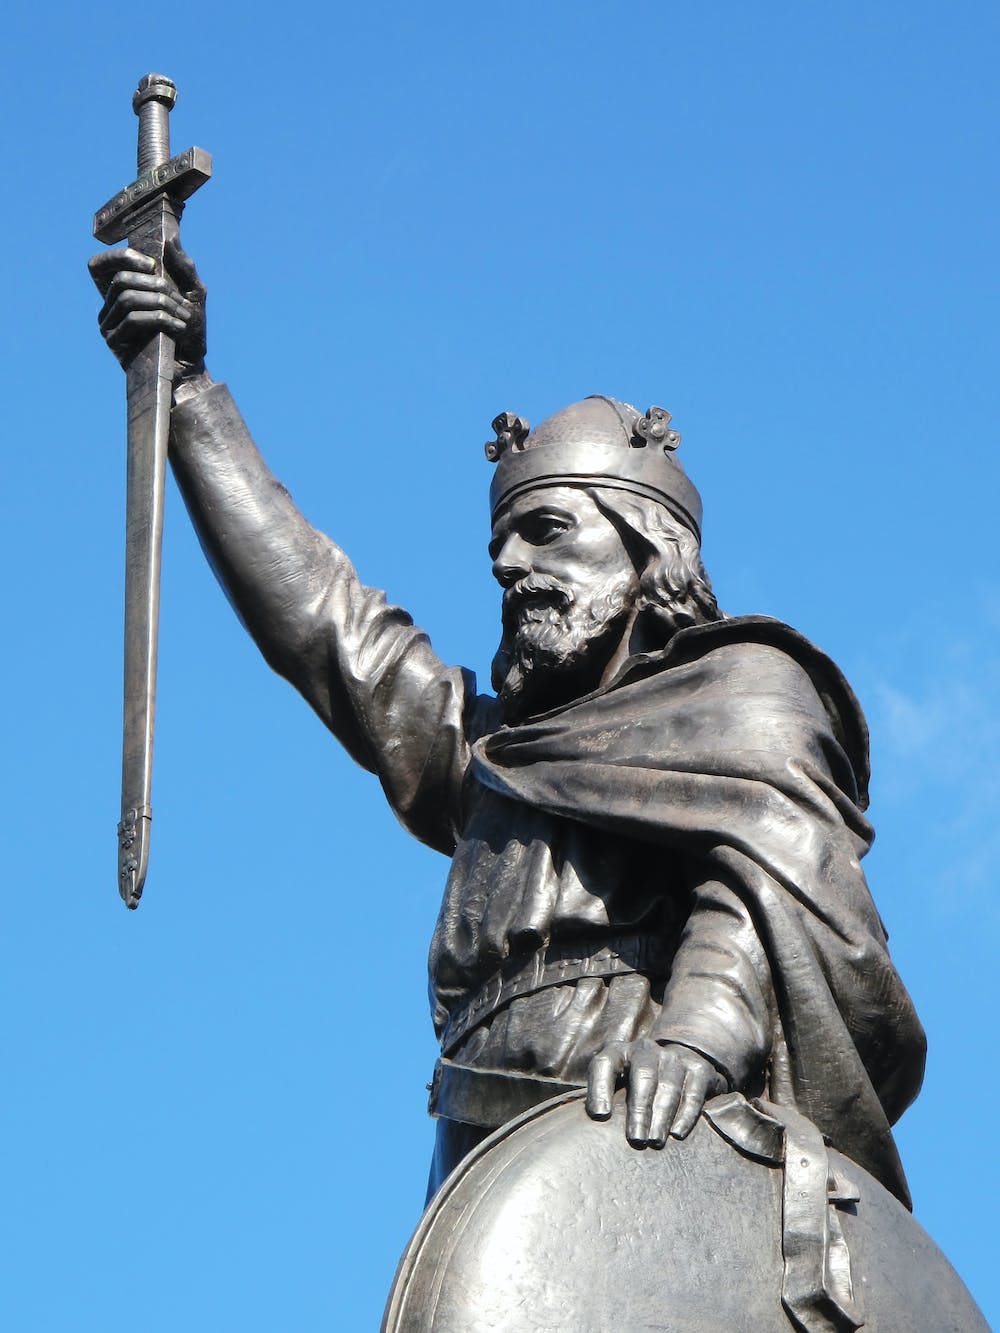 New research indicates that Alfred the Great probably wasn't that great